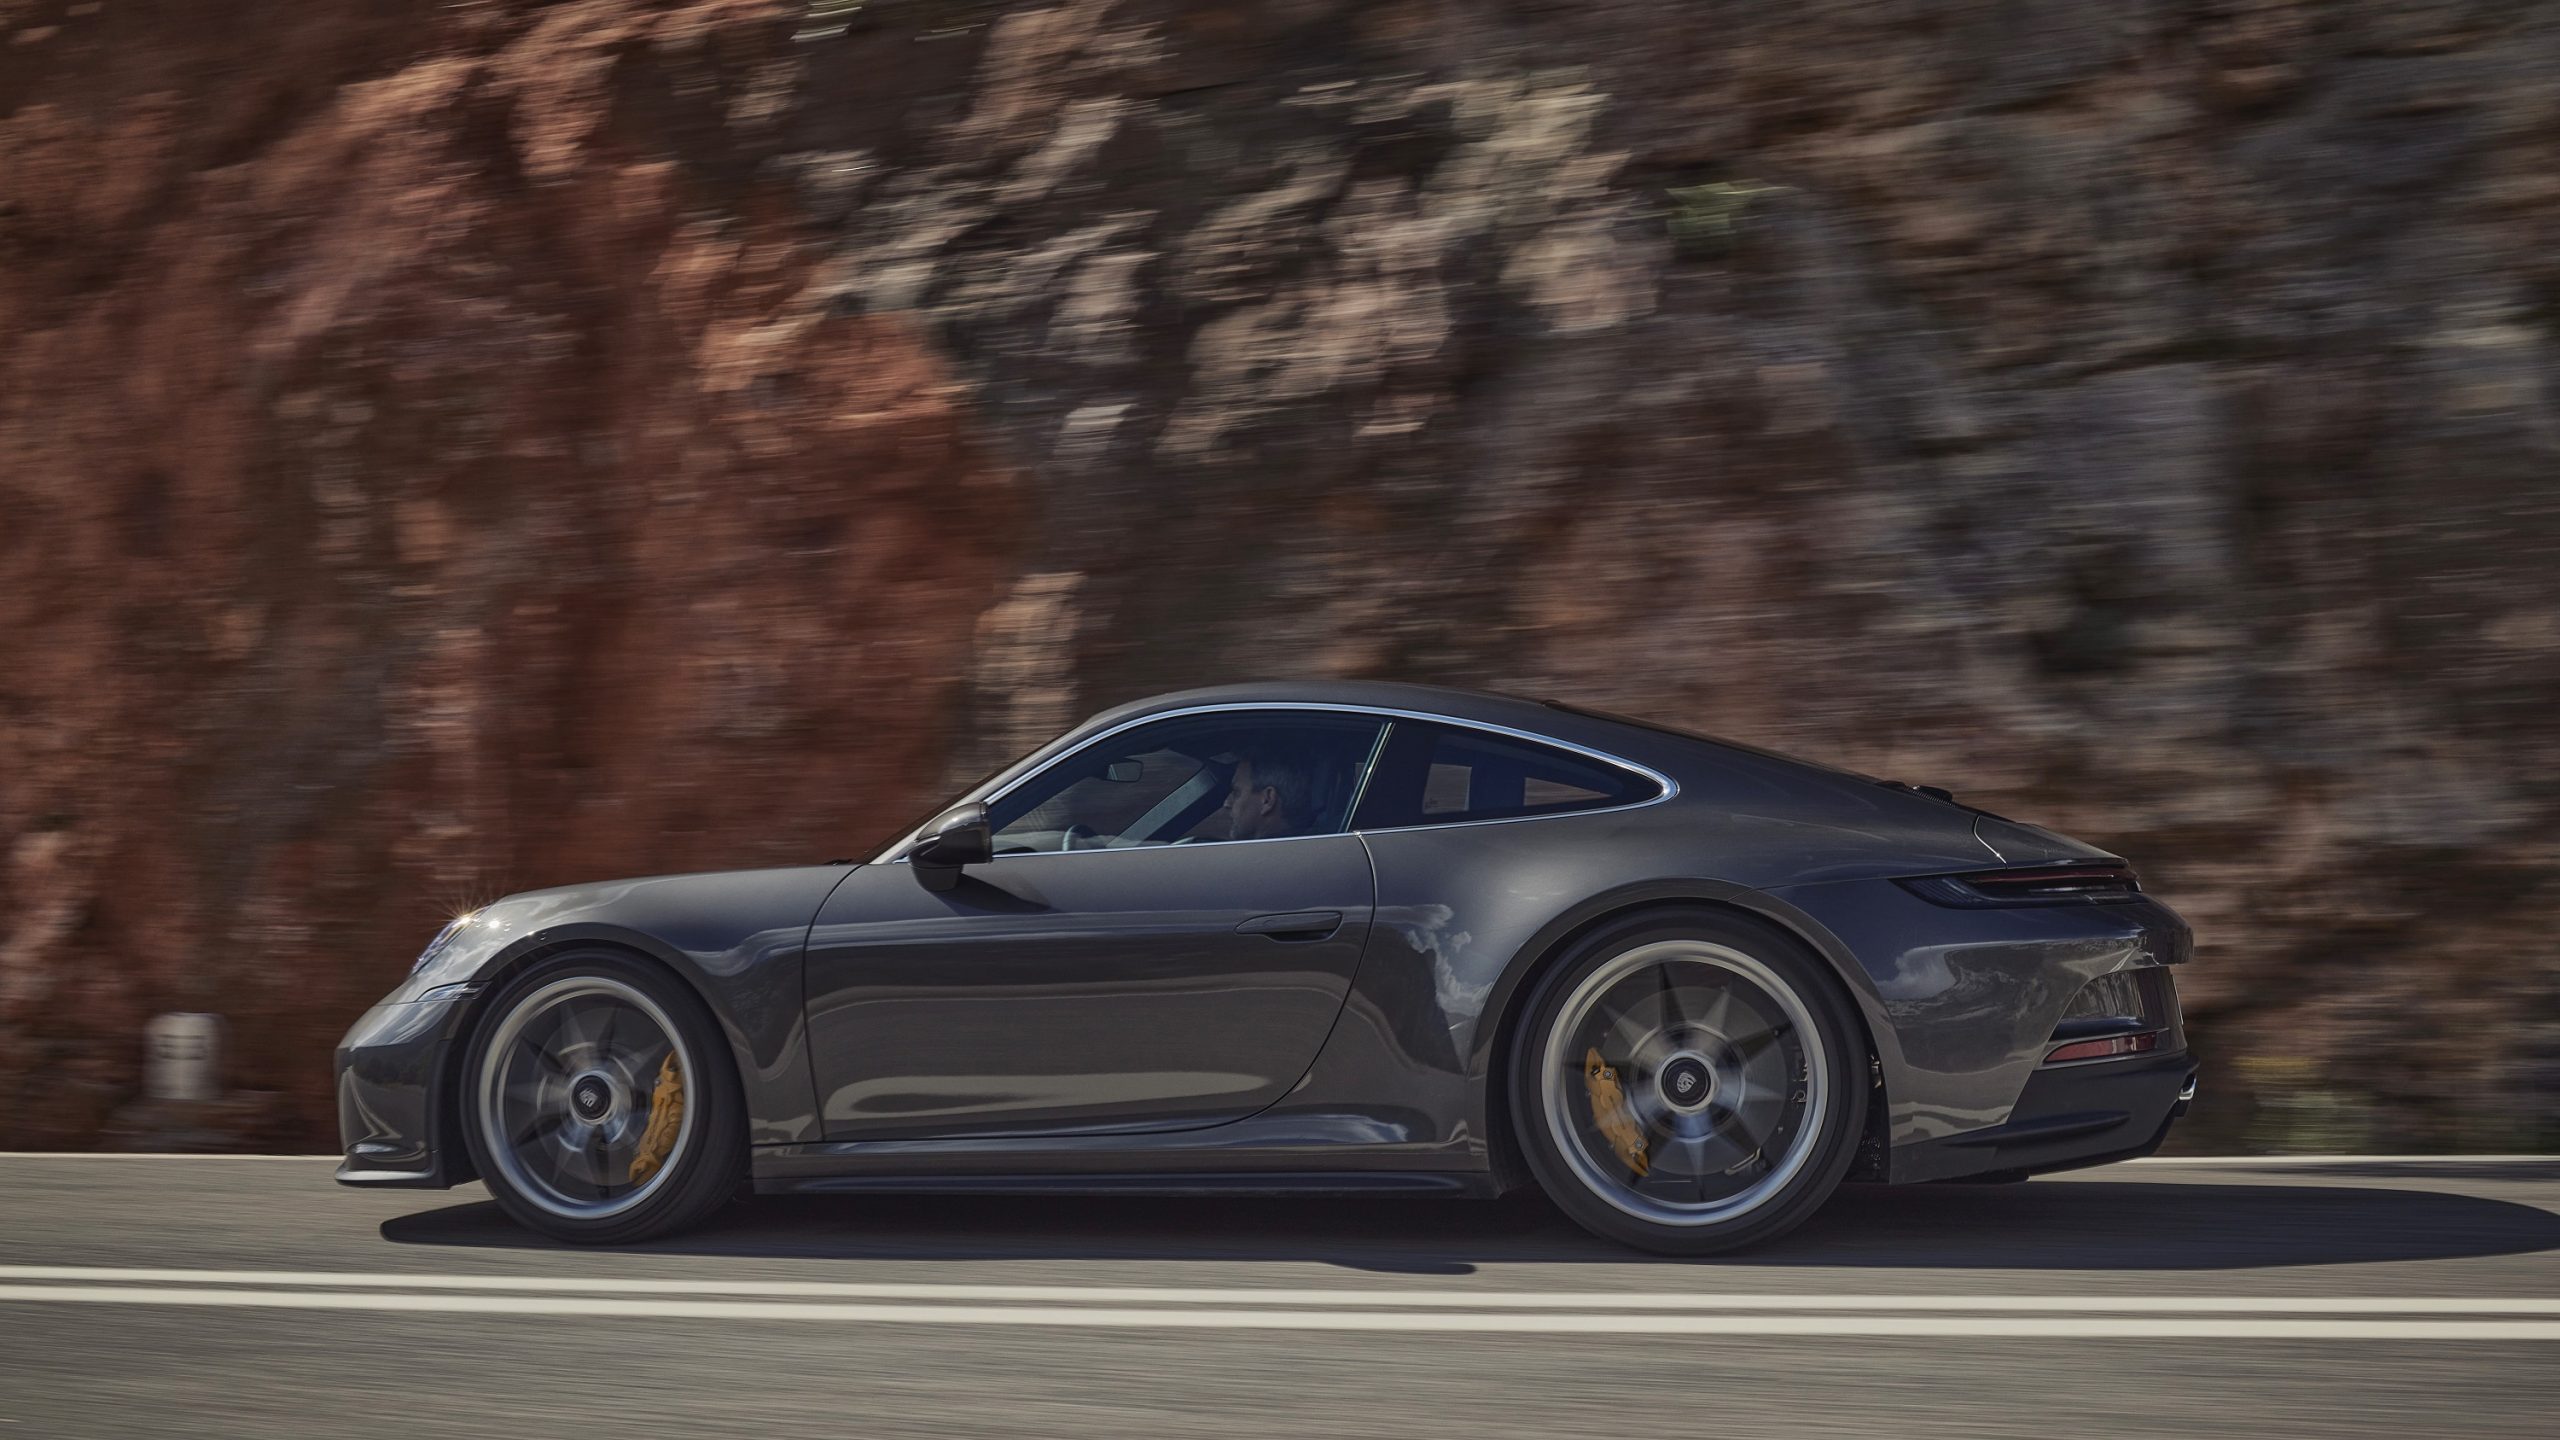 A grey Porsche 911 GT3 Touring shot in profile on a canyon road